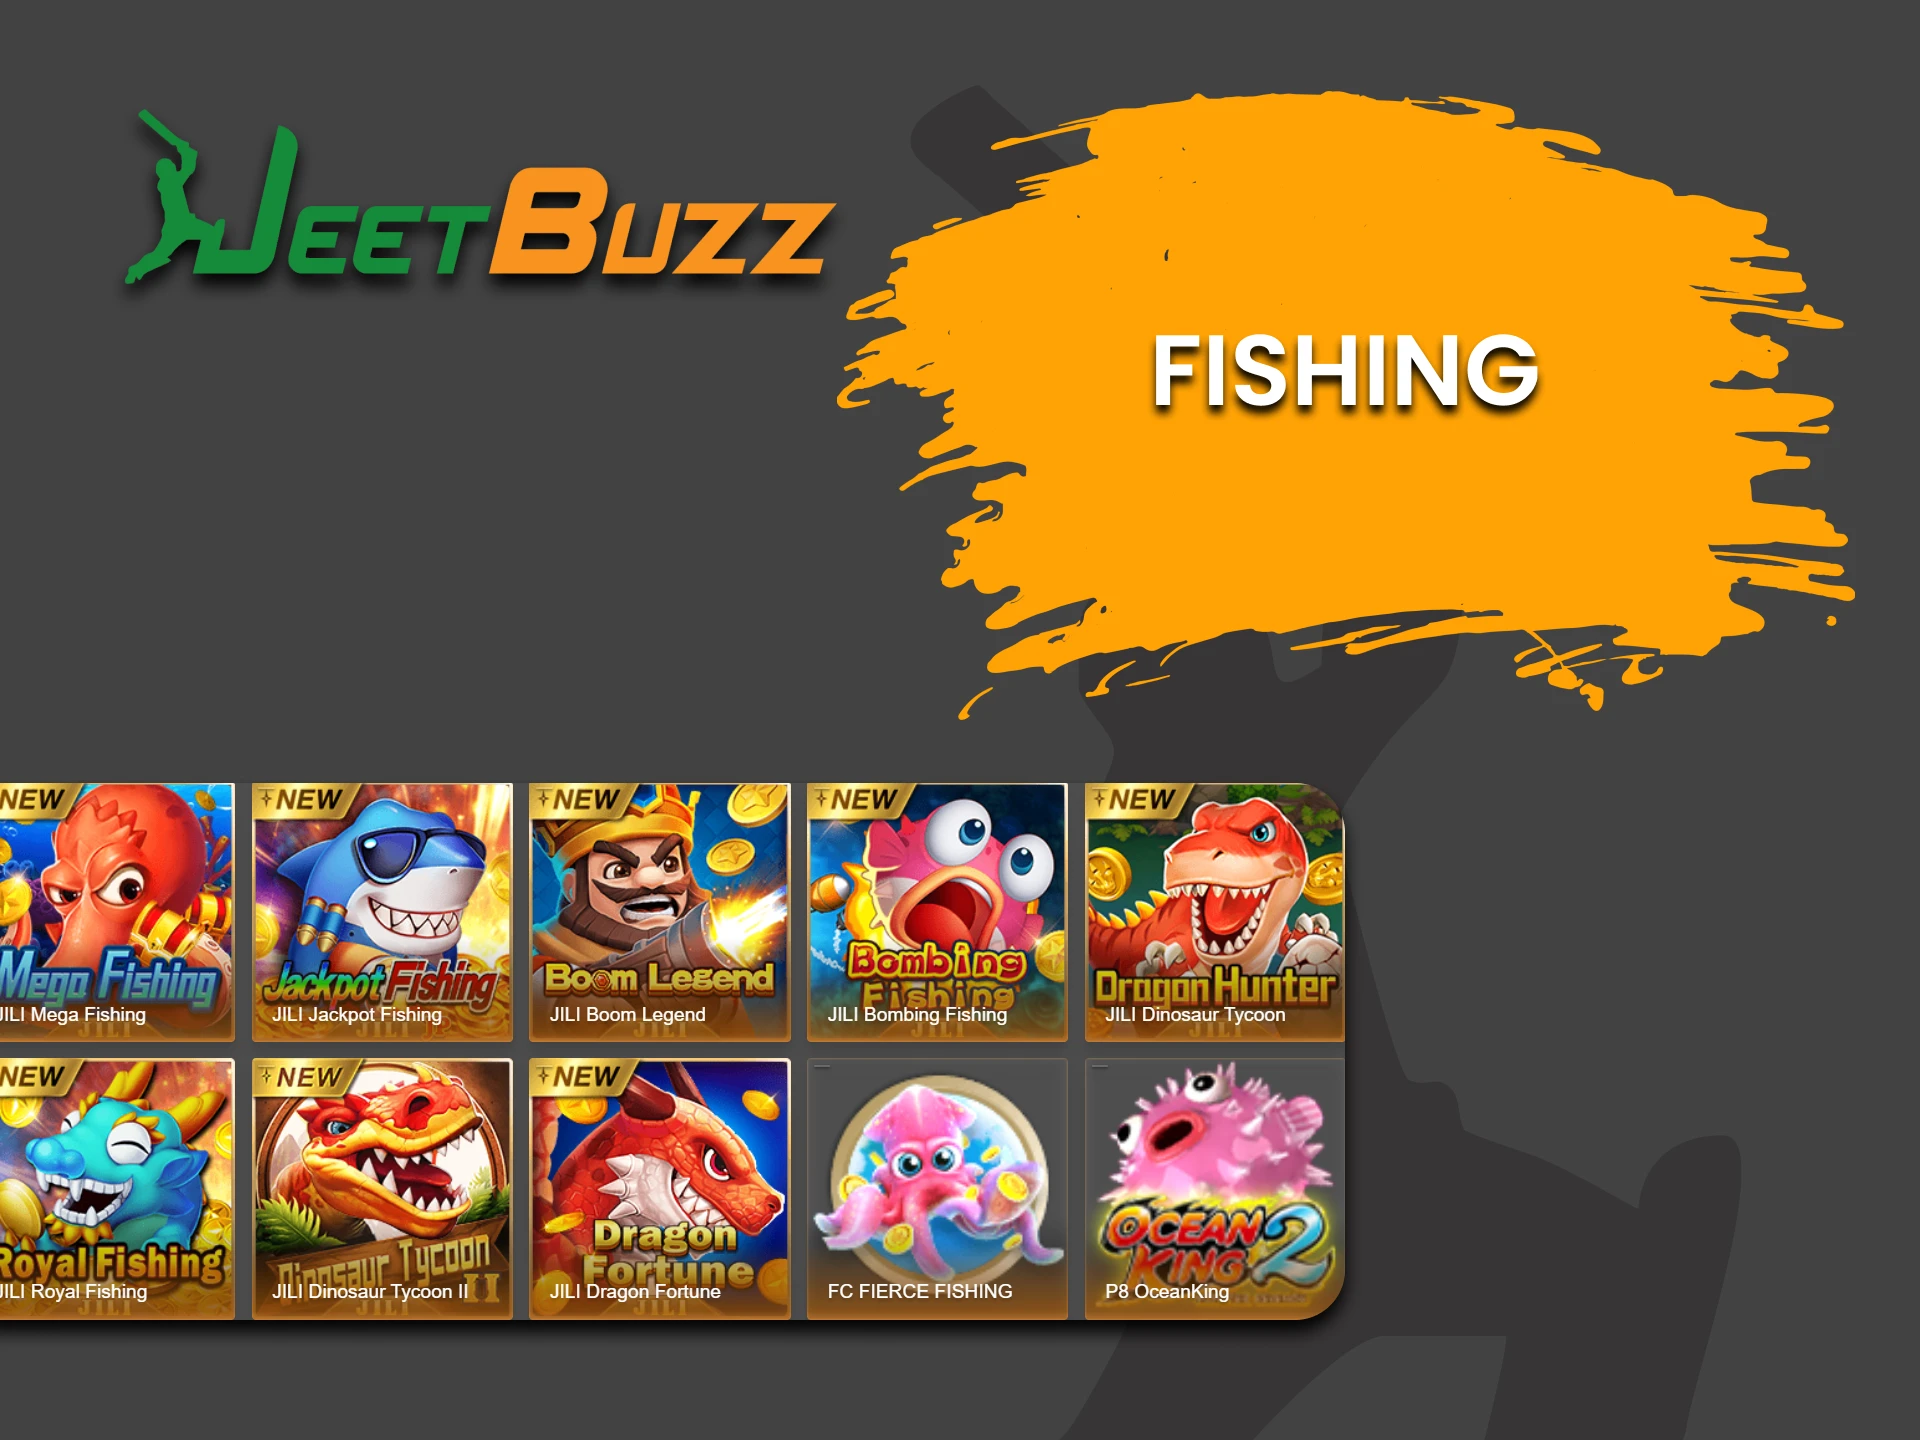 Go to the Fishing section for casino games on JeetBuzz.